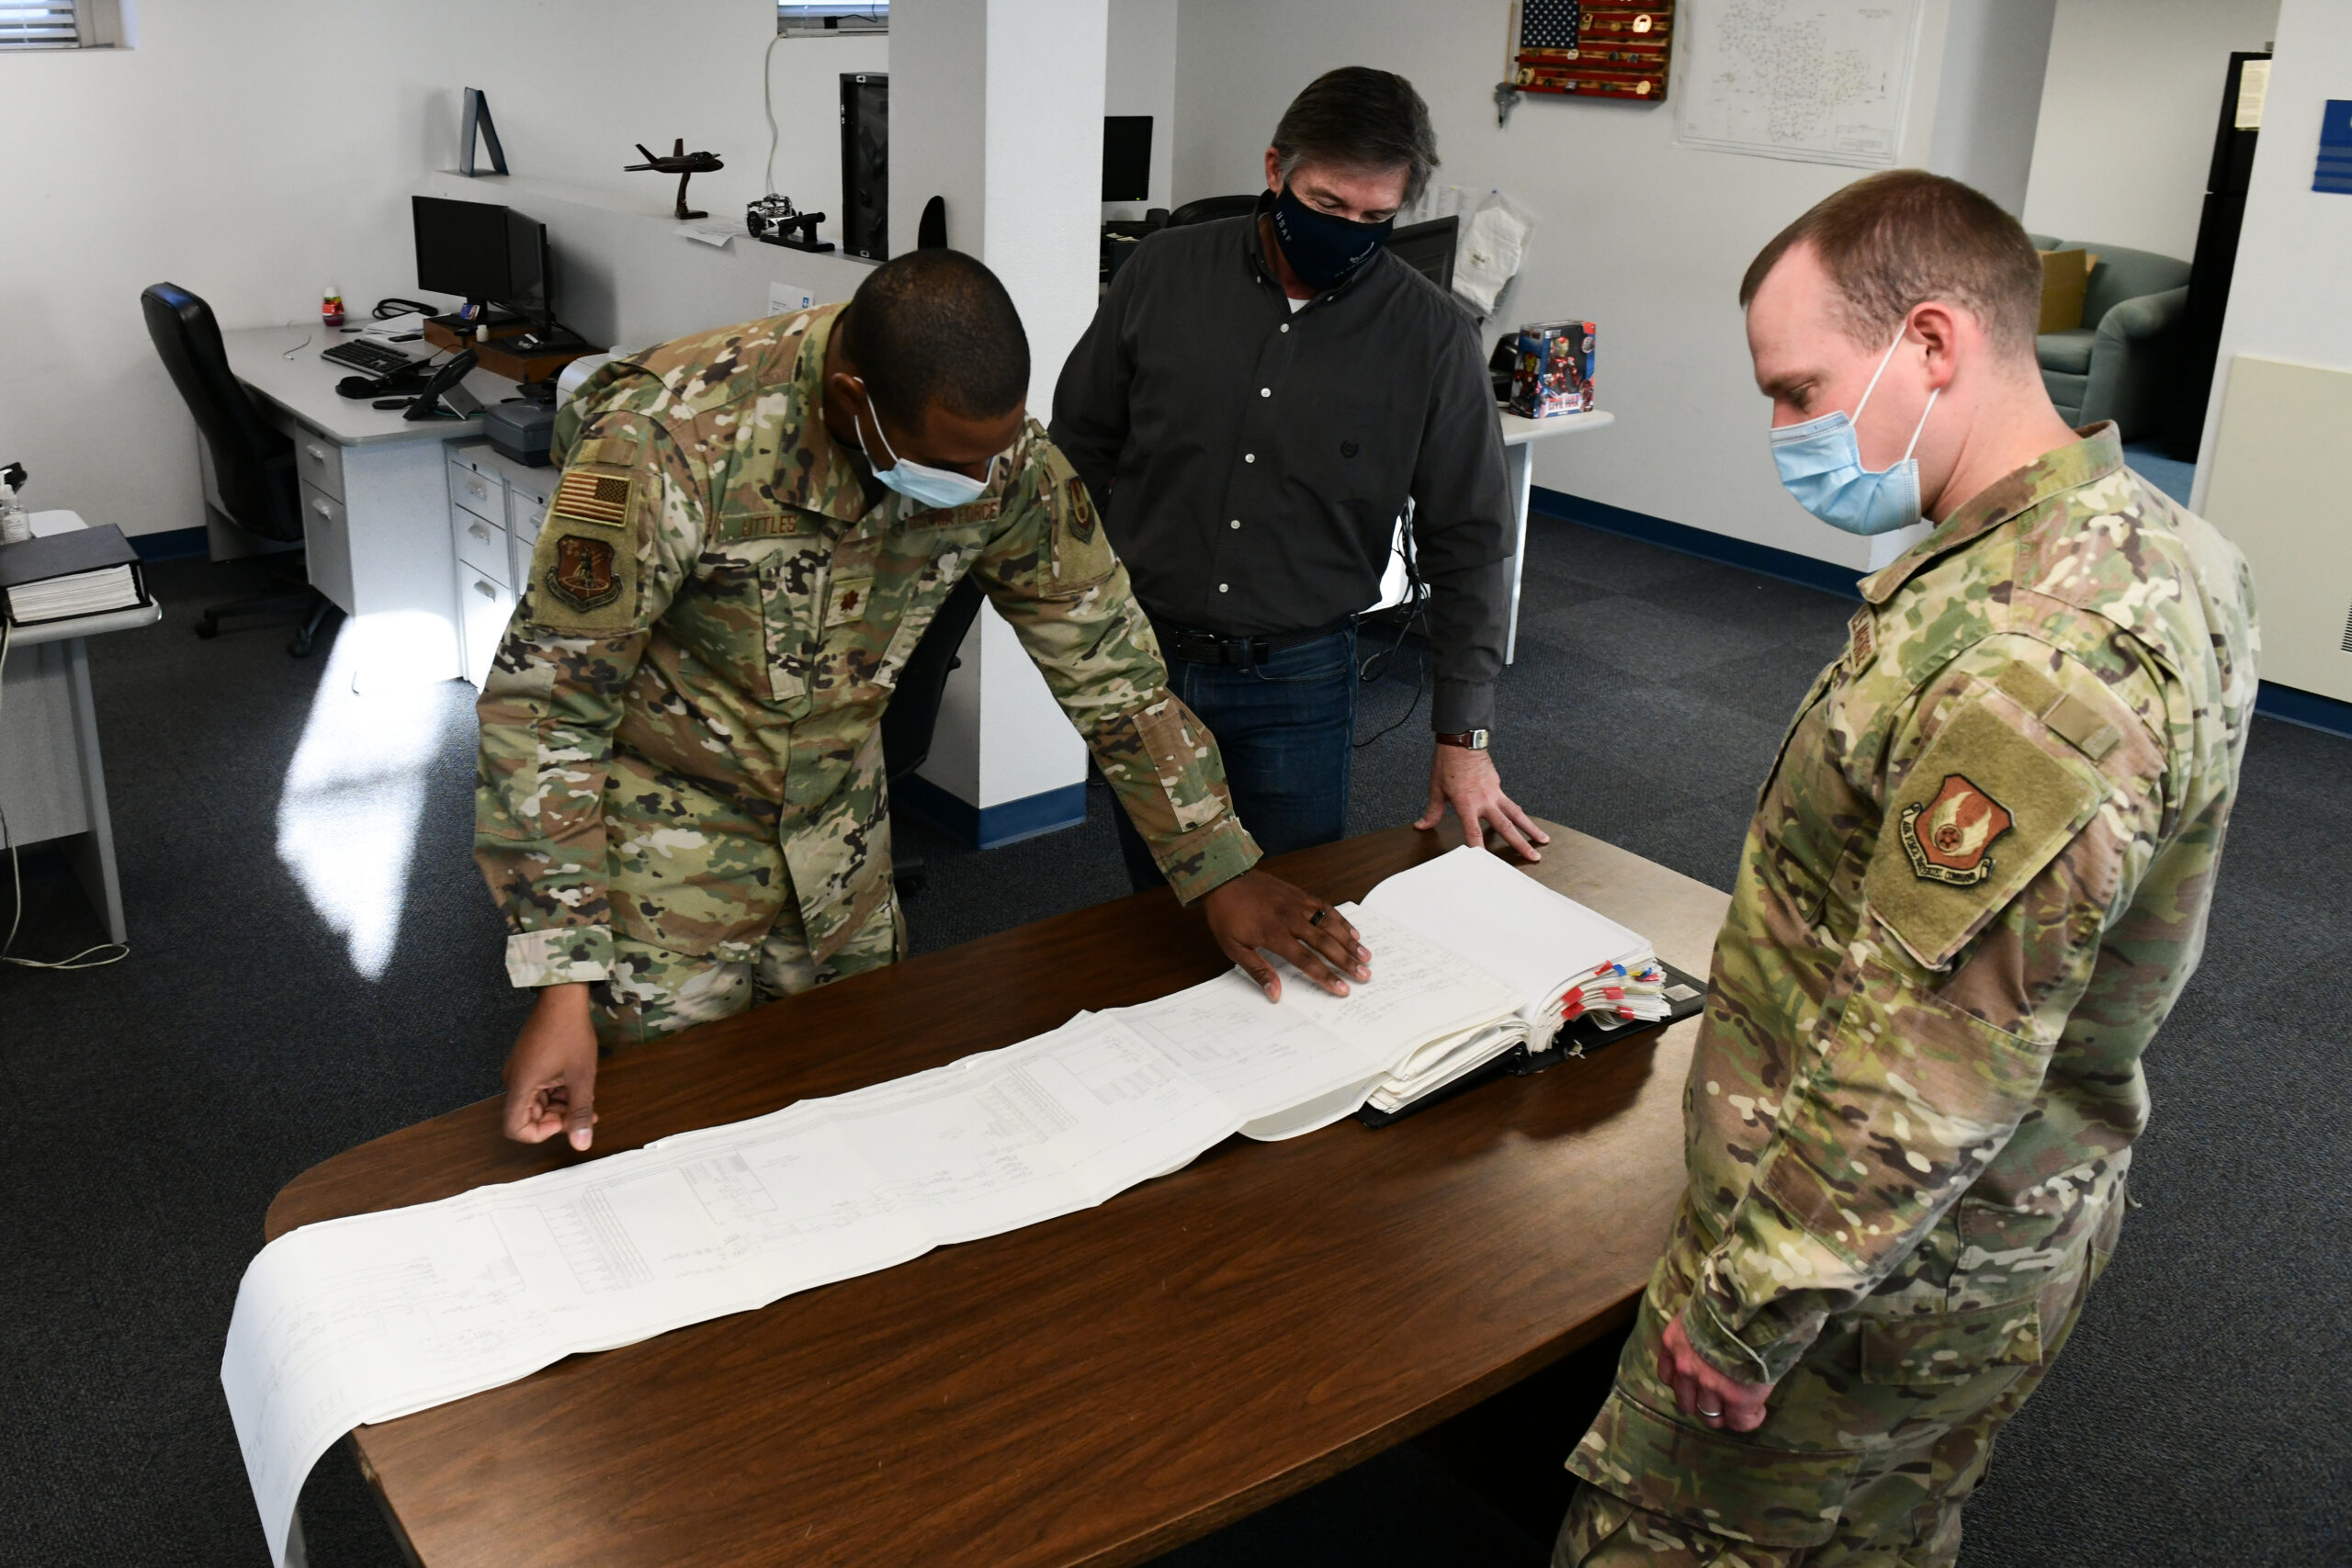 ICBM Technical engineers from the Air Force Nuclear Weapons Center out of Hill Air Force Base, Utah, look over documents that will allow them to help the 90th Maintenance Group with any problems they come across, Dec. 7, 2021, at F.E Warren AFB, Wyoming. The technical engineering squadron at Hill AFB, Utah has an office located at F.E Warren AFB, Wyoming in order to provide the local maintenance squadron with the help they need to complete their day-to-day mission. (U.S. Air Force photo by Airman Sarah Post)